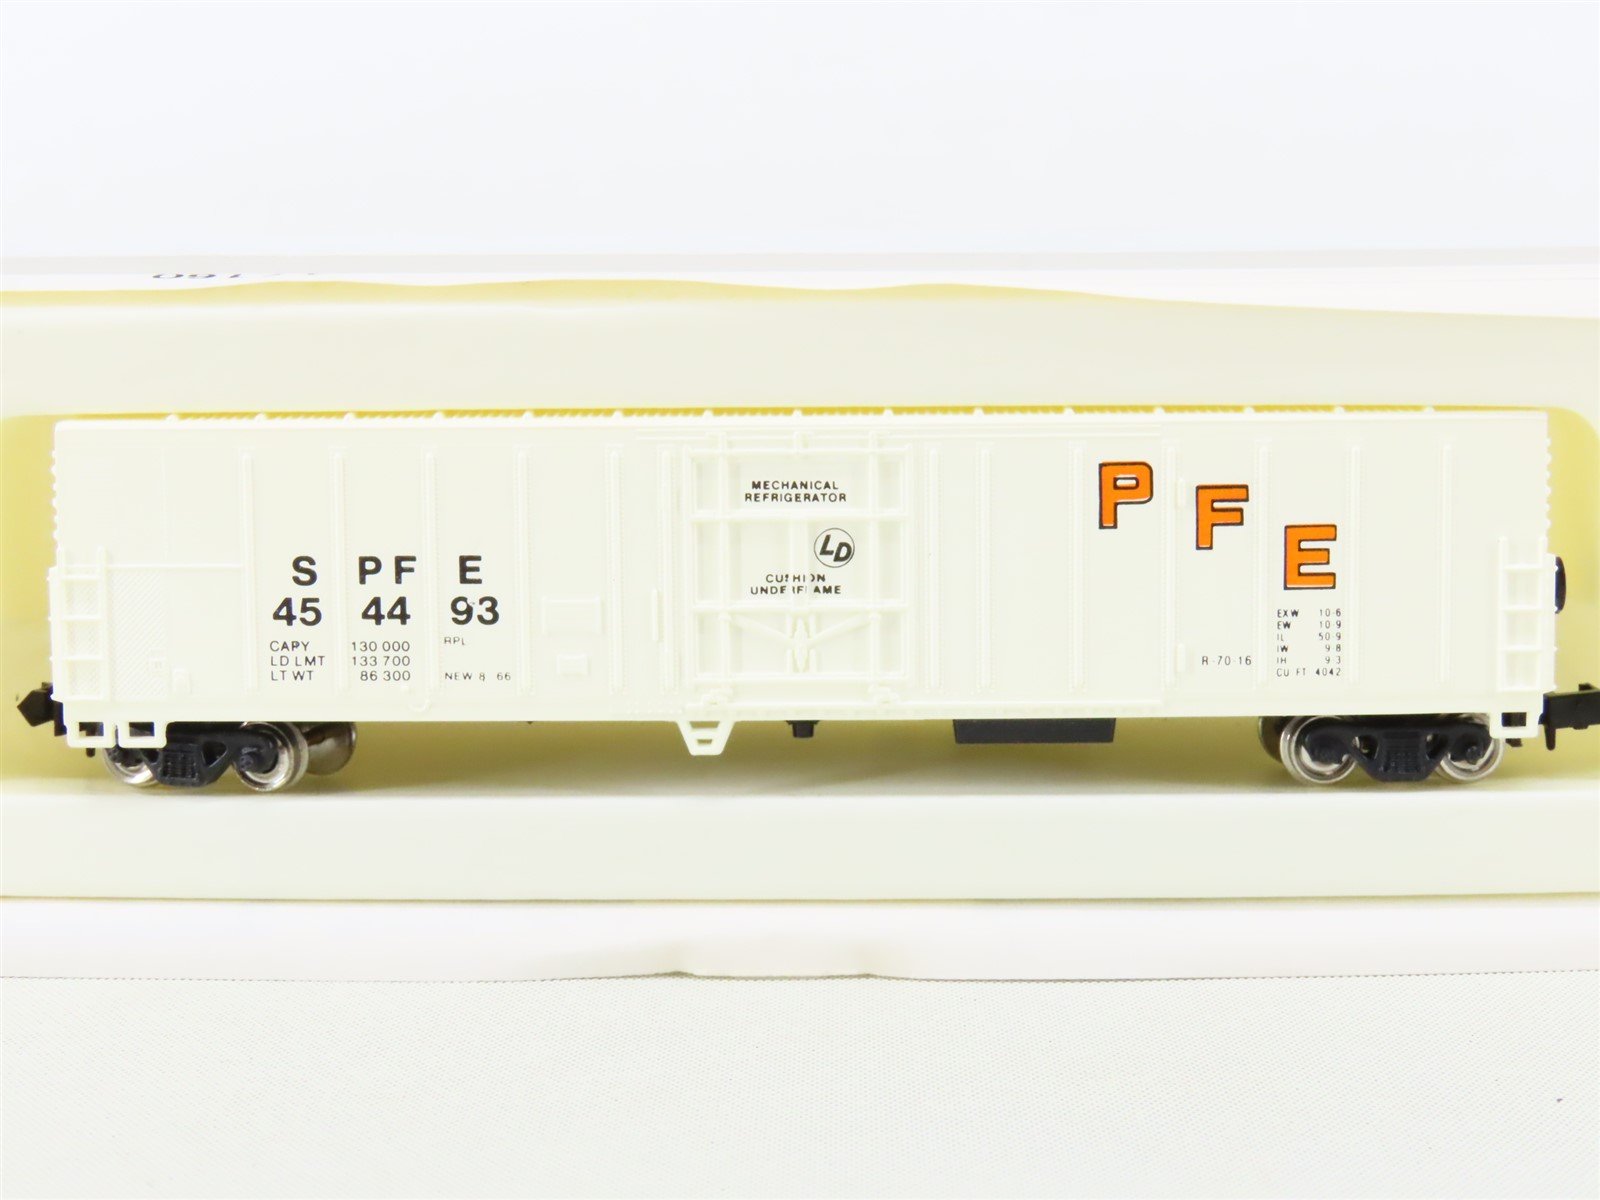 N Con-Cor #001-148204-6 SPFE PFE Pacific Fruit Express 57' Mech. Reefer #454493